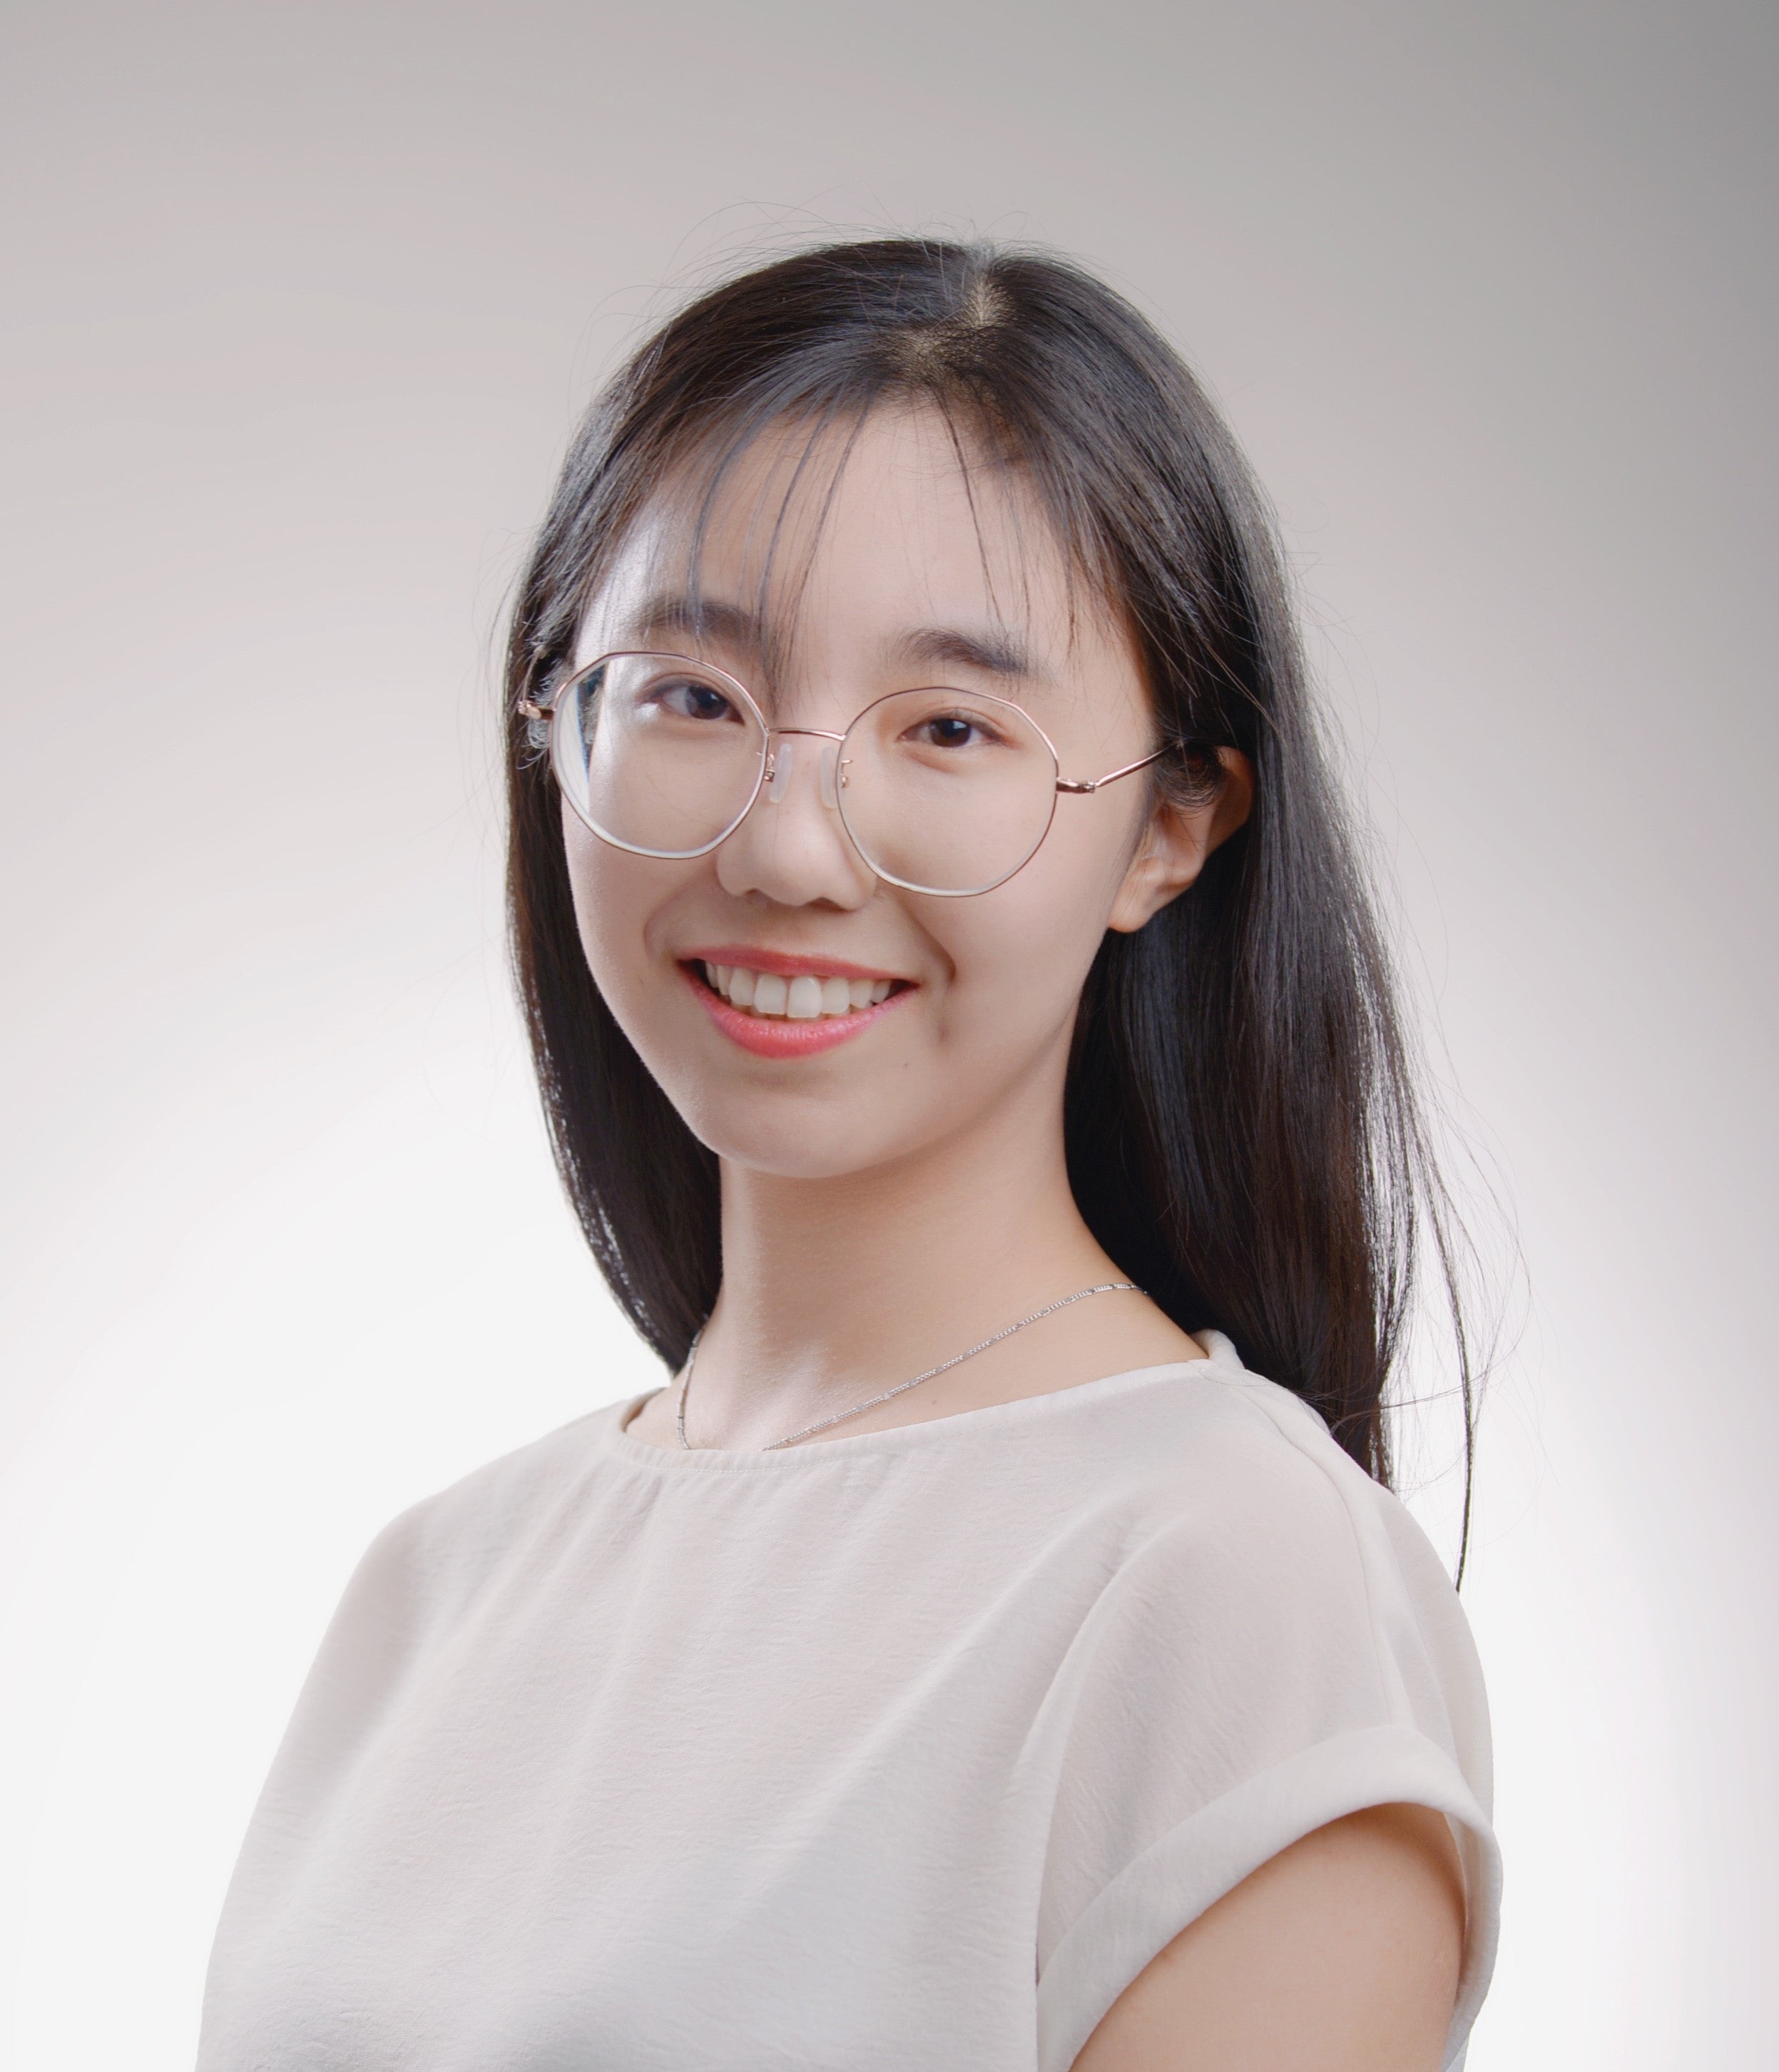 Anna Guan (she/her), Product specialist at ATS